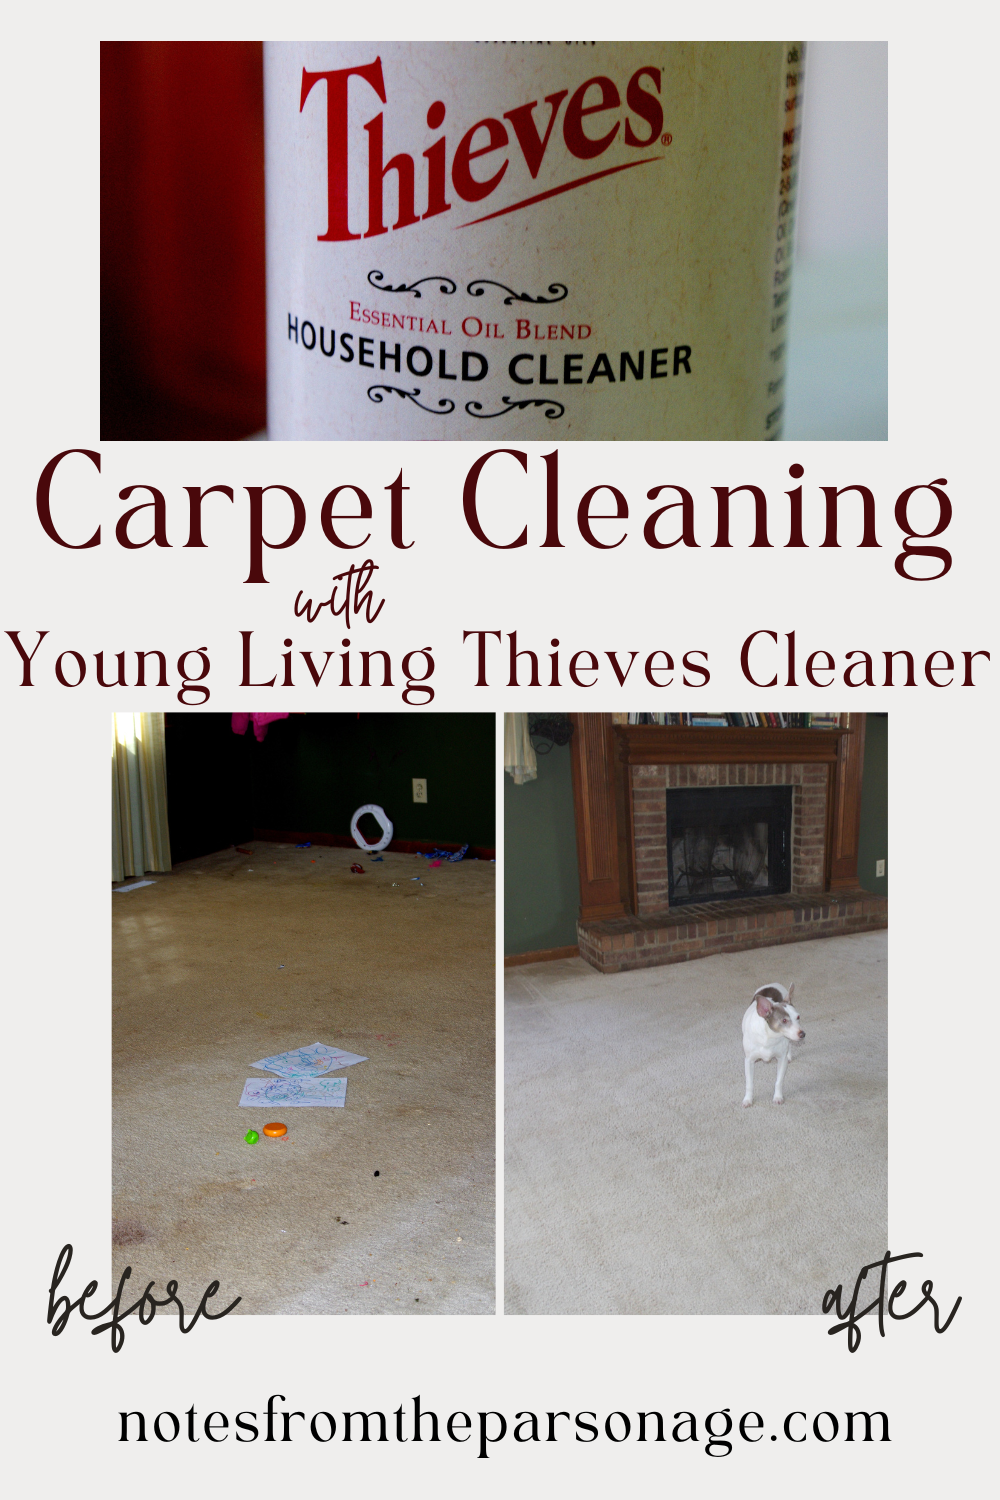 Picture collage of Young Living Thieves Cleaner on top with before and after on bottom and title Carpet Cleaning with Young Living Thieves Cleaner in the center.